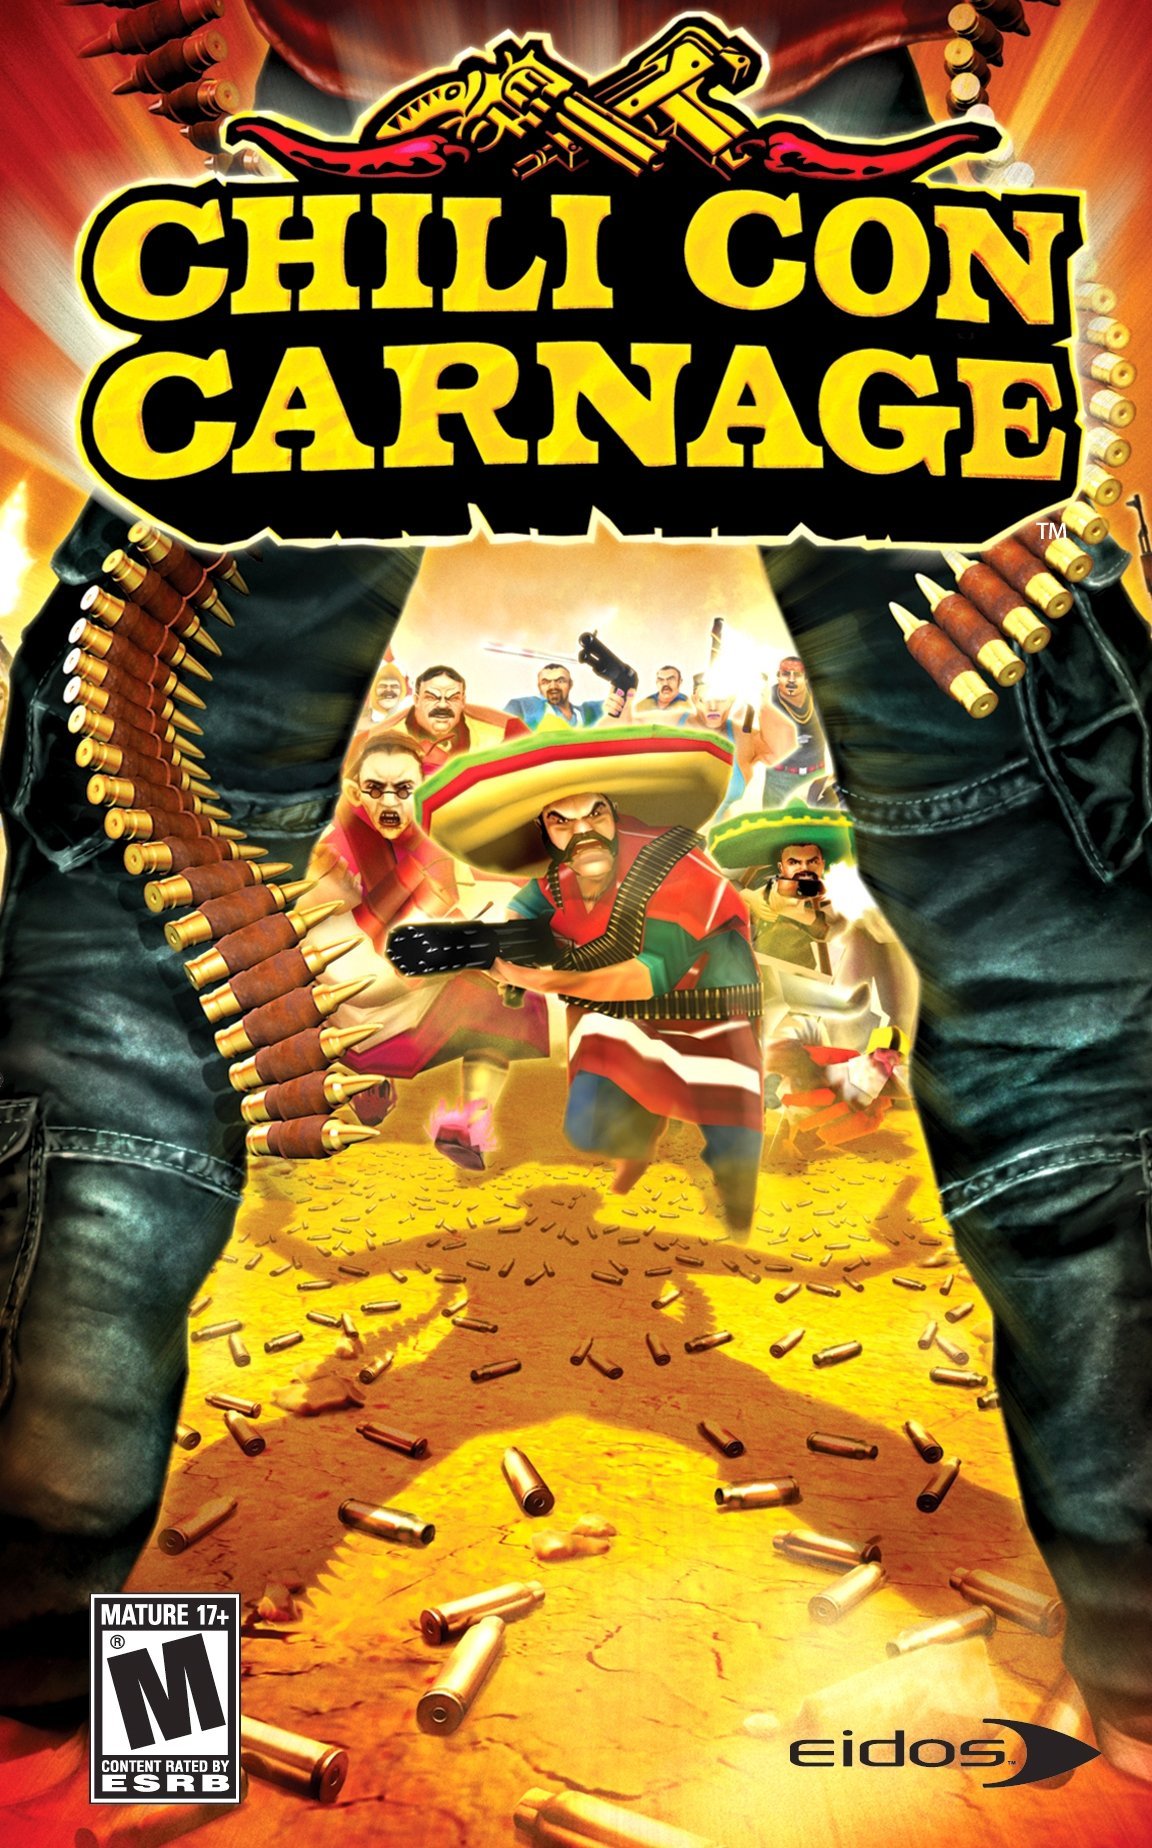 Image of Chili Con Carnage